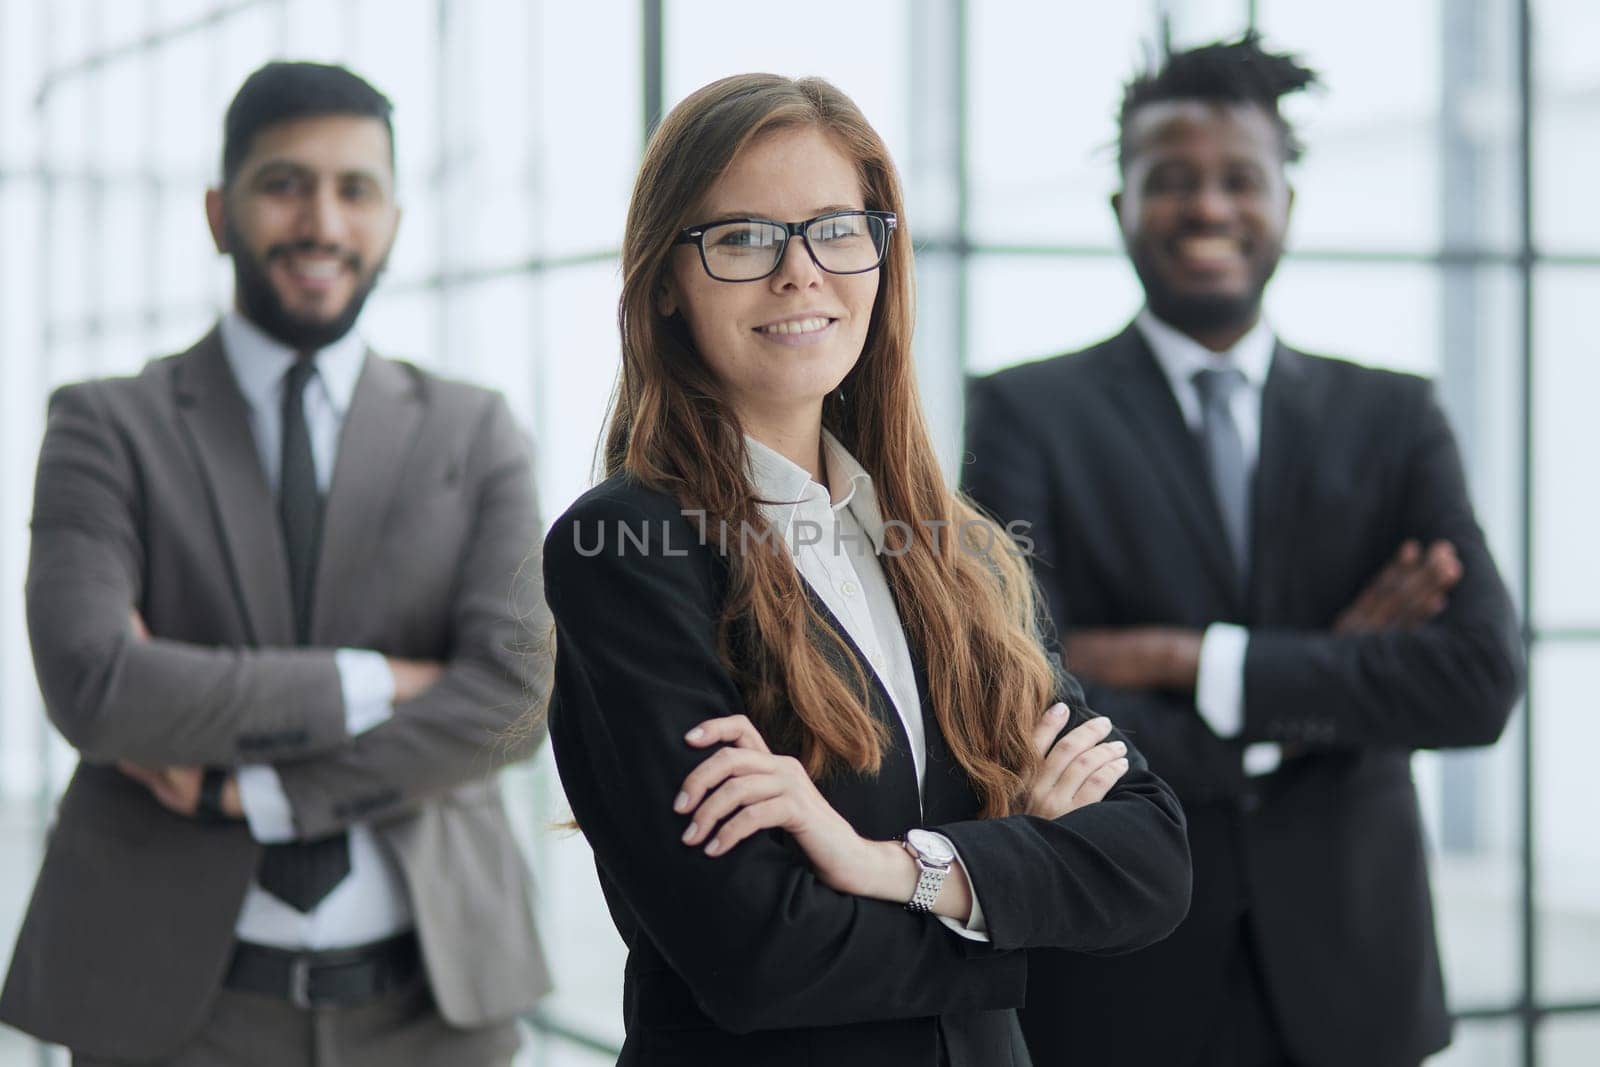 Beauty and men. three office workers are smiling and looking at the camera.